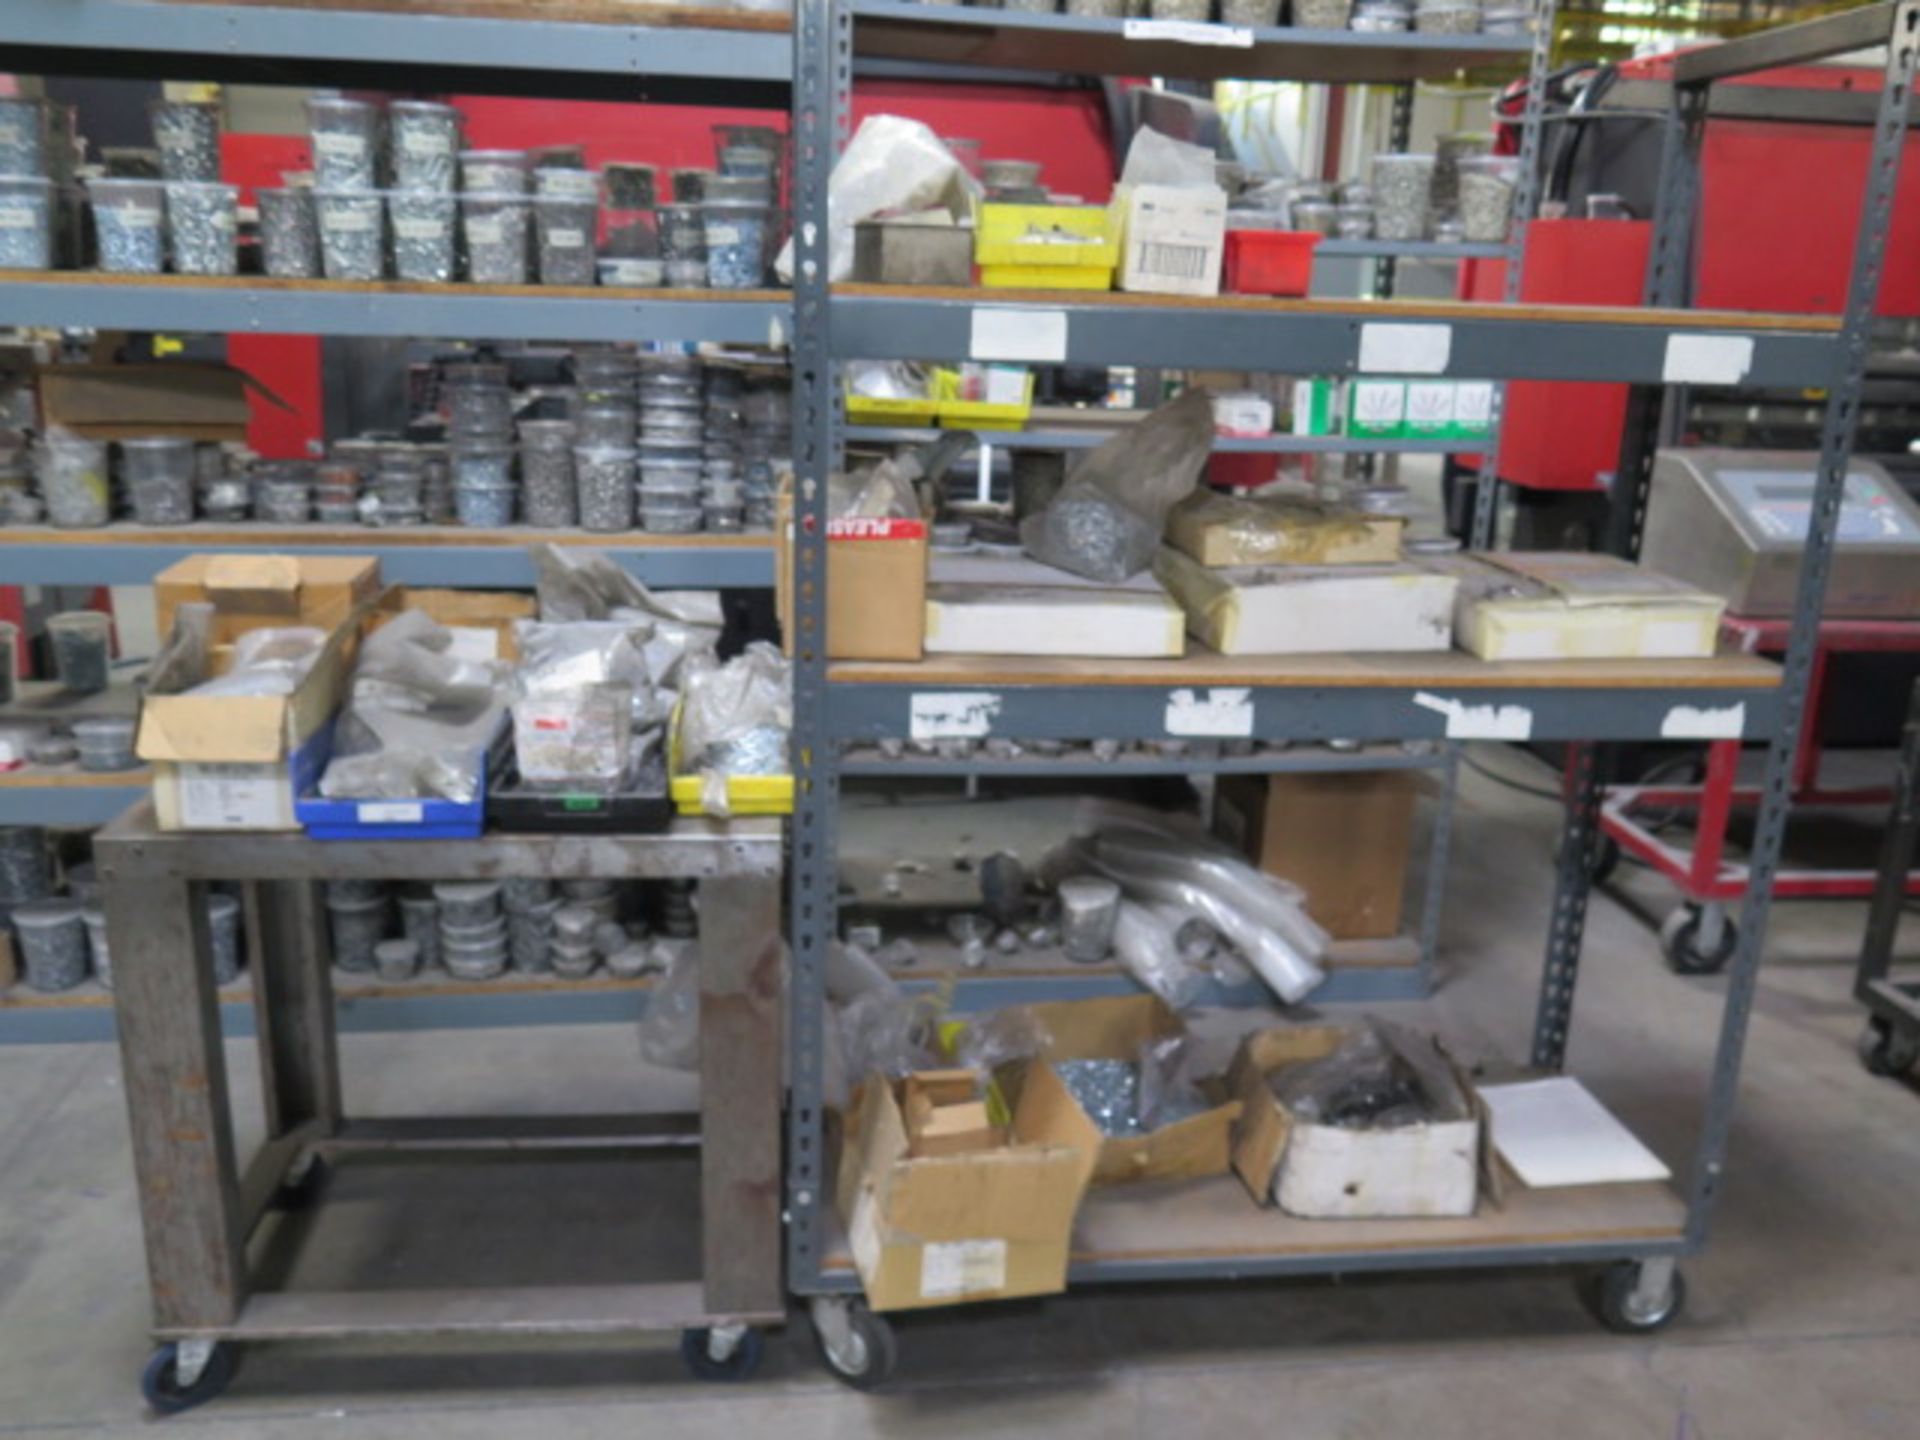 Large Quantity of Insertion Hardware w/ Shelves and Carts (SOLD AS-IS - NO WARRANTY) - Image 12 of 12